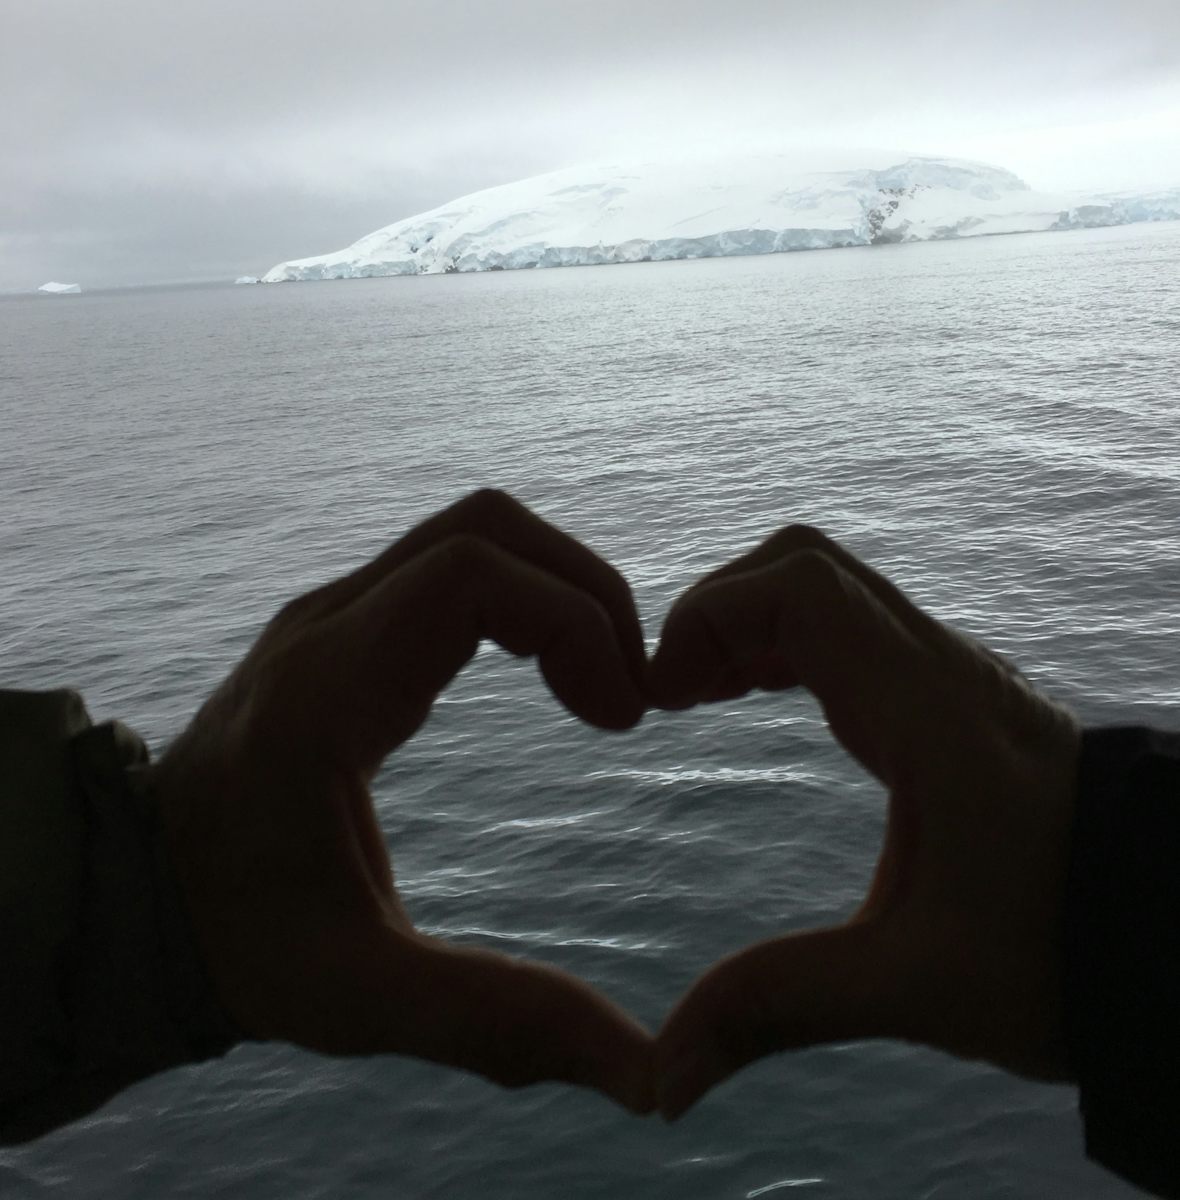 Our first glimpse of Antarctica, celebrating our wedding anniversary in the early morning of February 20.